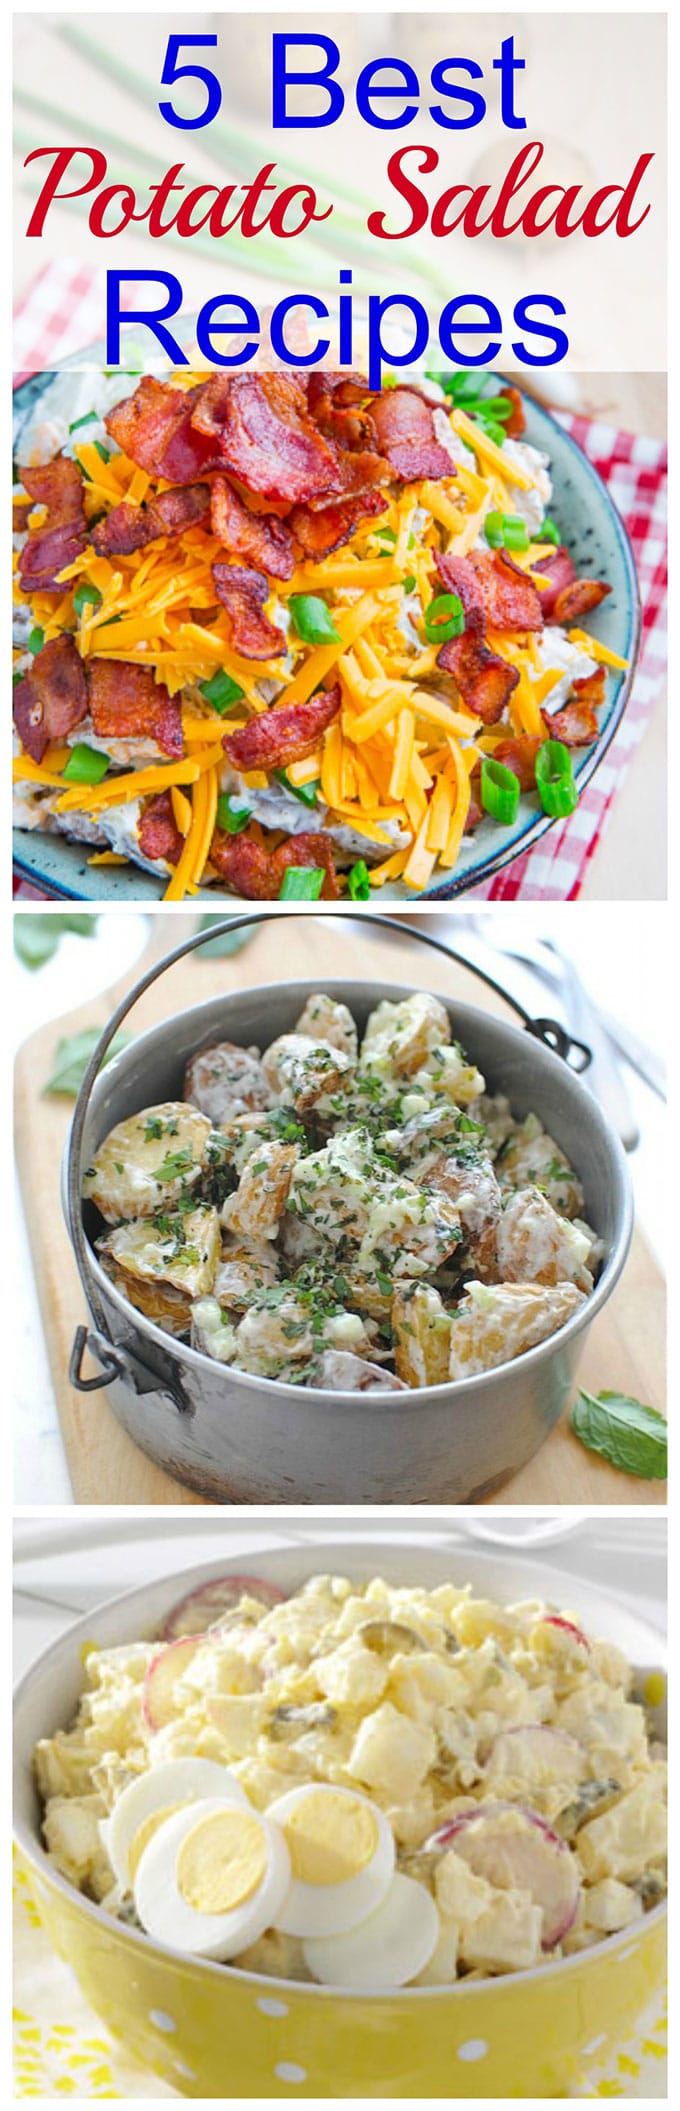 5 of the BEST potato salad recipes for your summer picnics. Impress your friends and family at your next get together with one of these unique recipes!